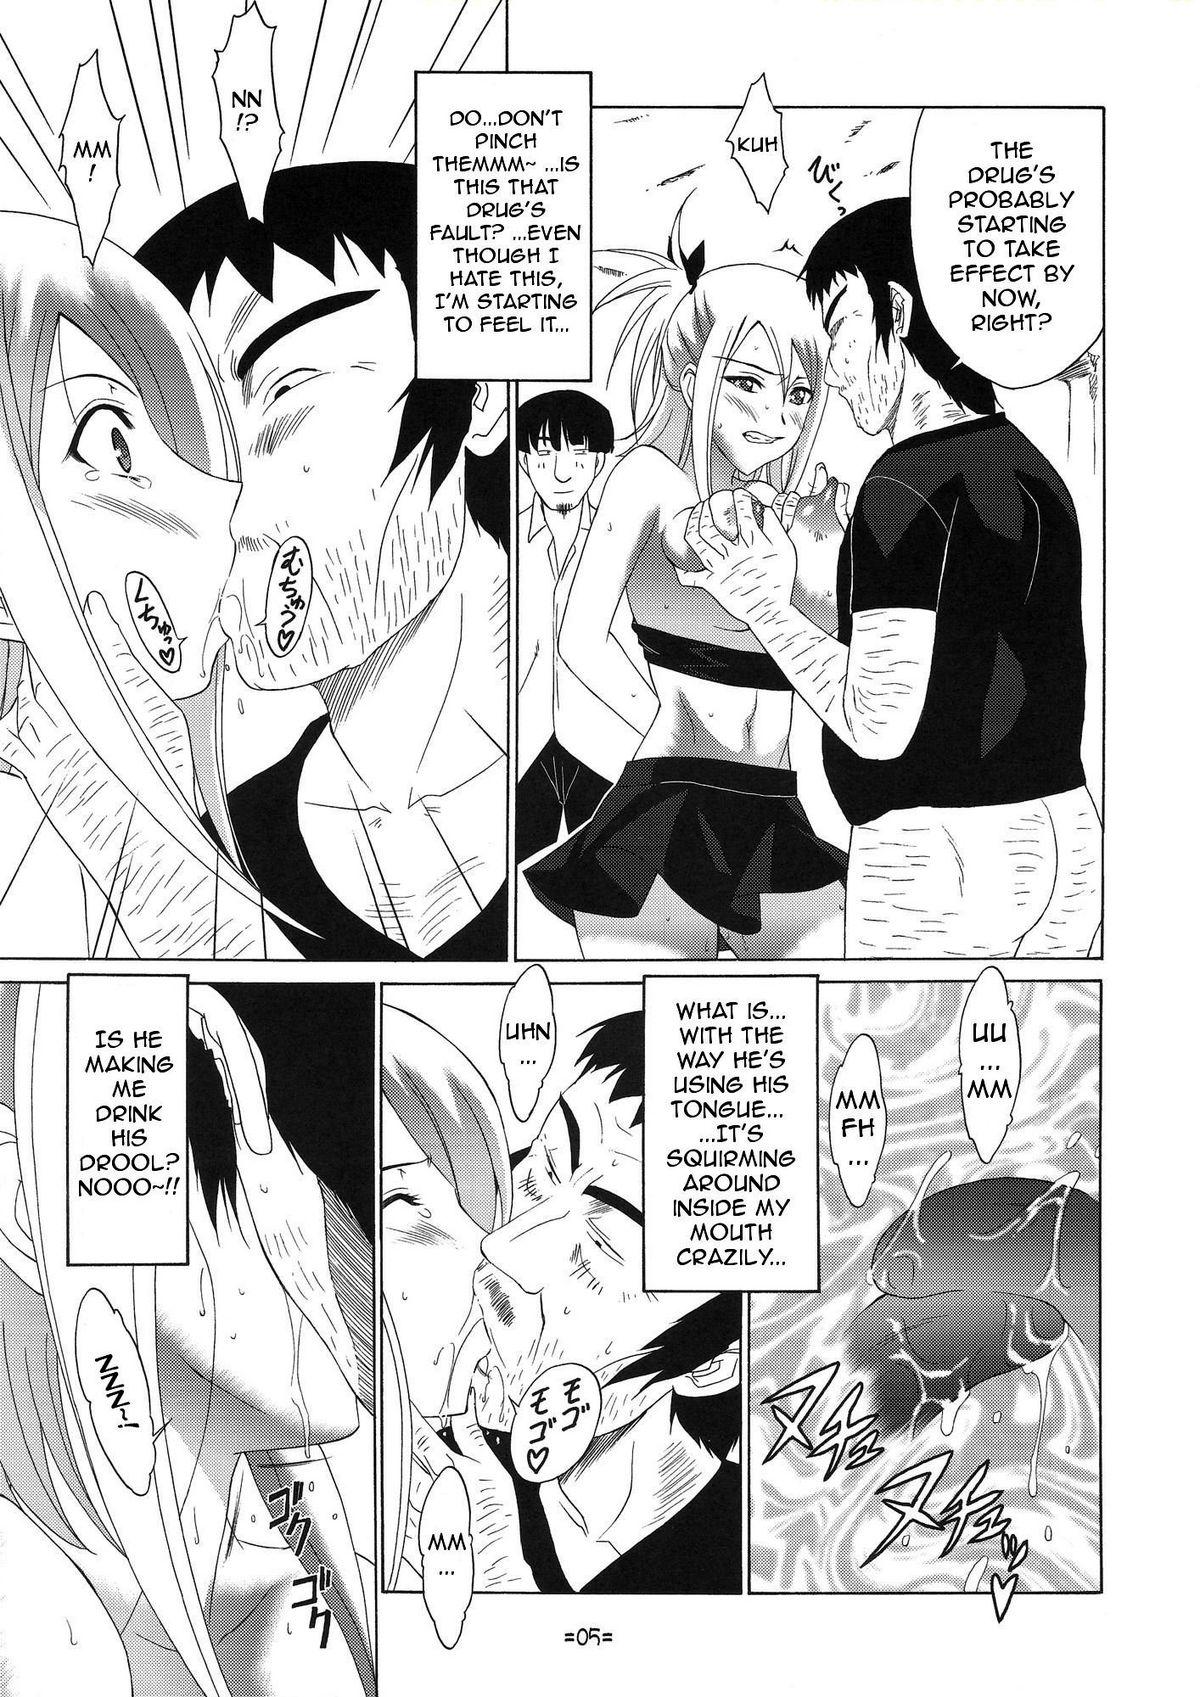 Red FAIRY SLAVE II - Fairy tail Stepdad - Page 6